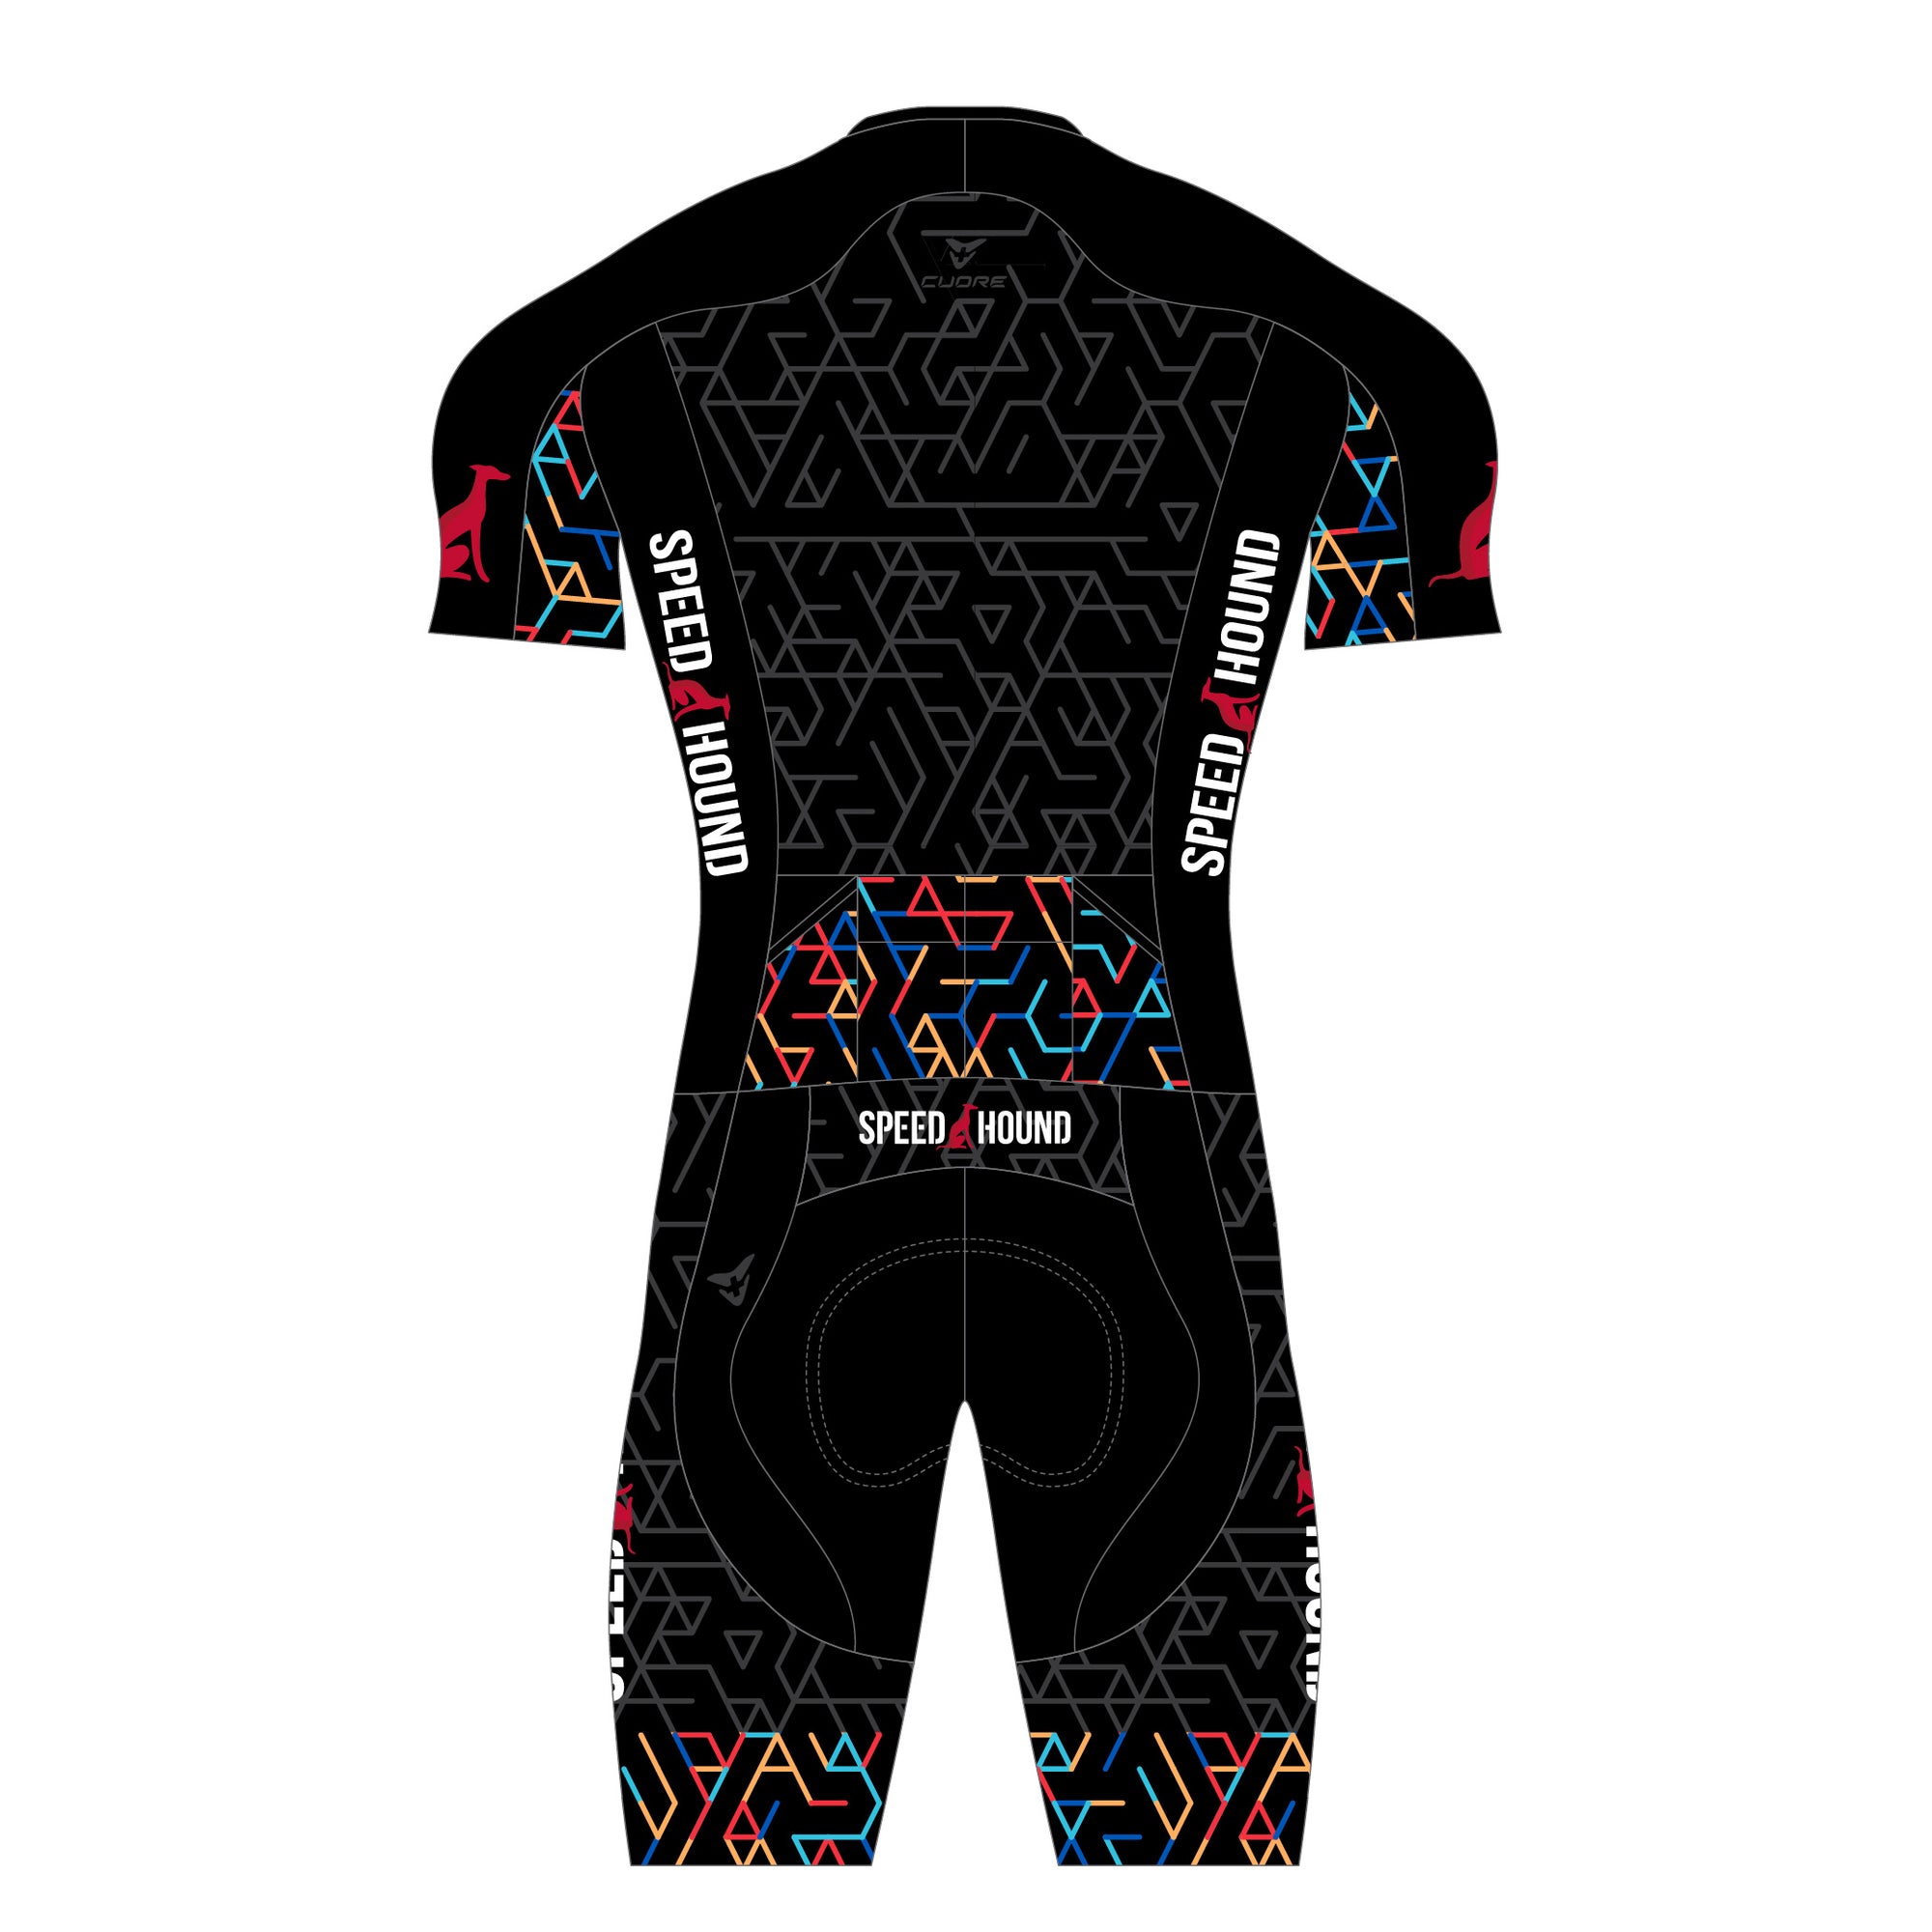 Mission Possible Speedsuit - Limited Edition